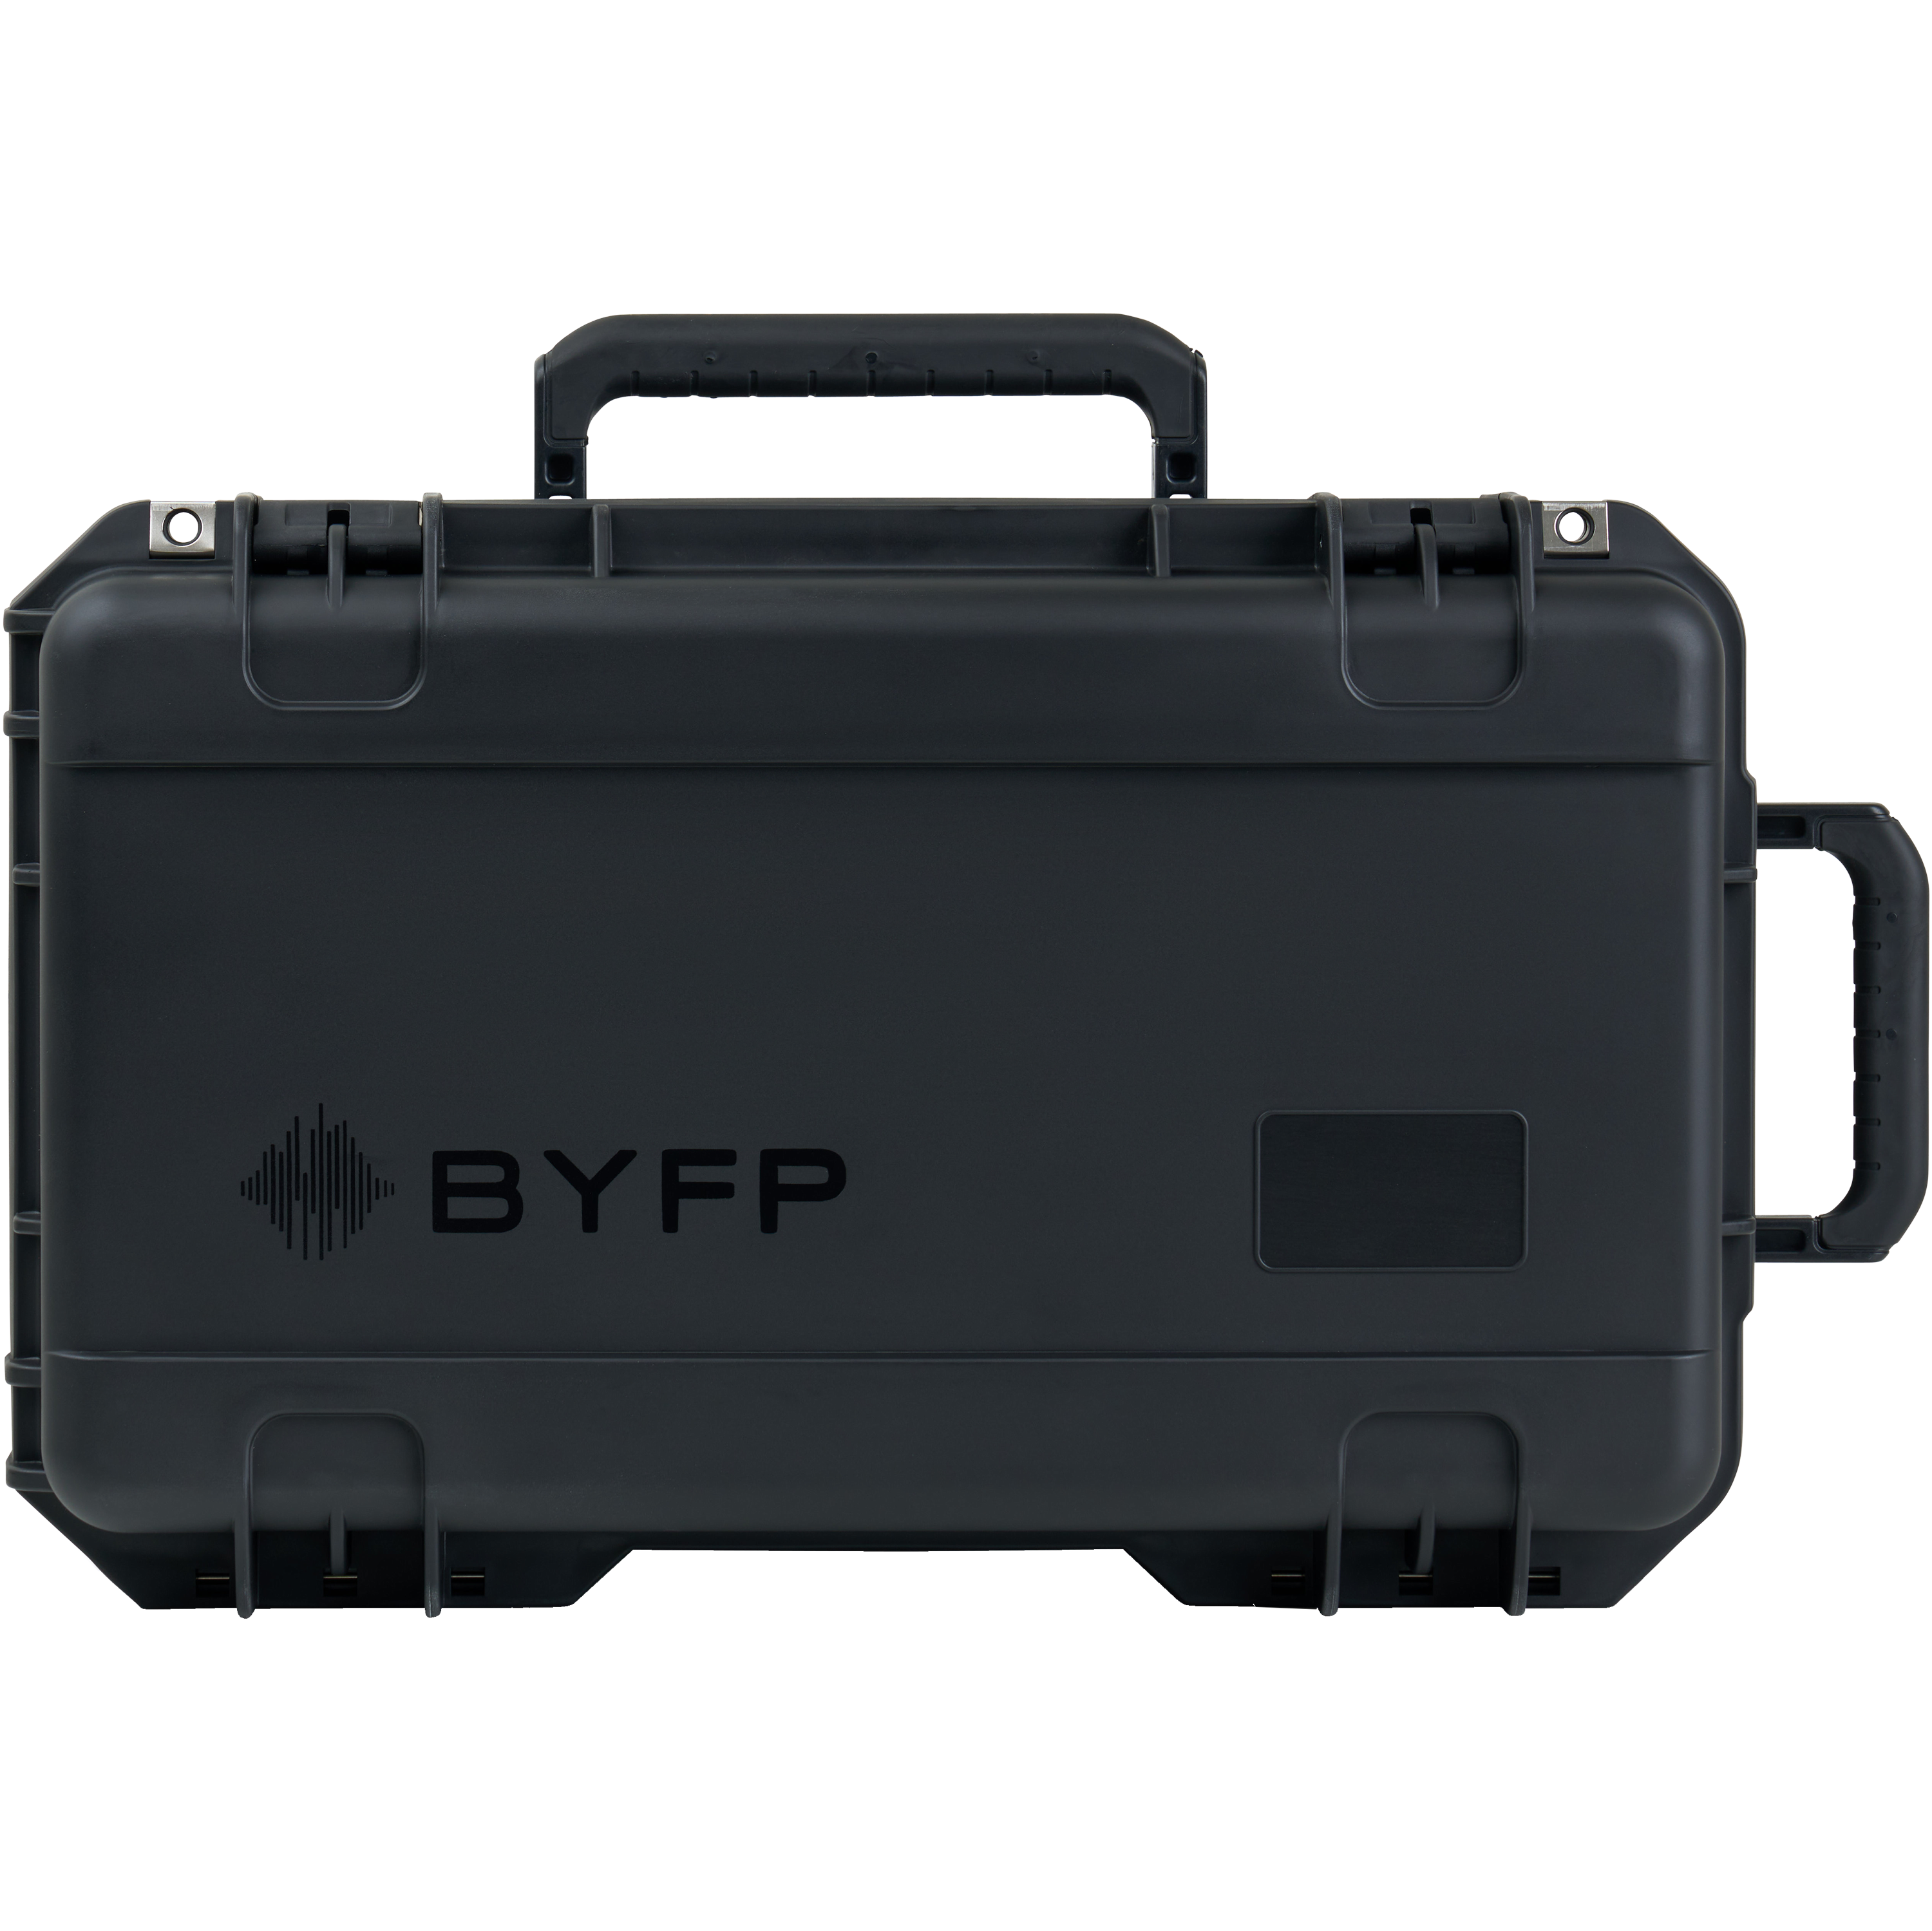 BYFP ipCase for 6x Radial Catapult Interfaces